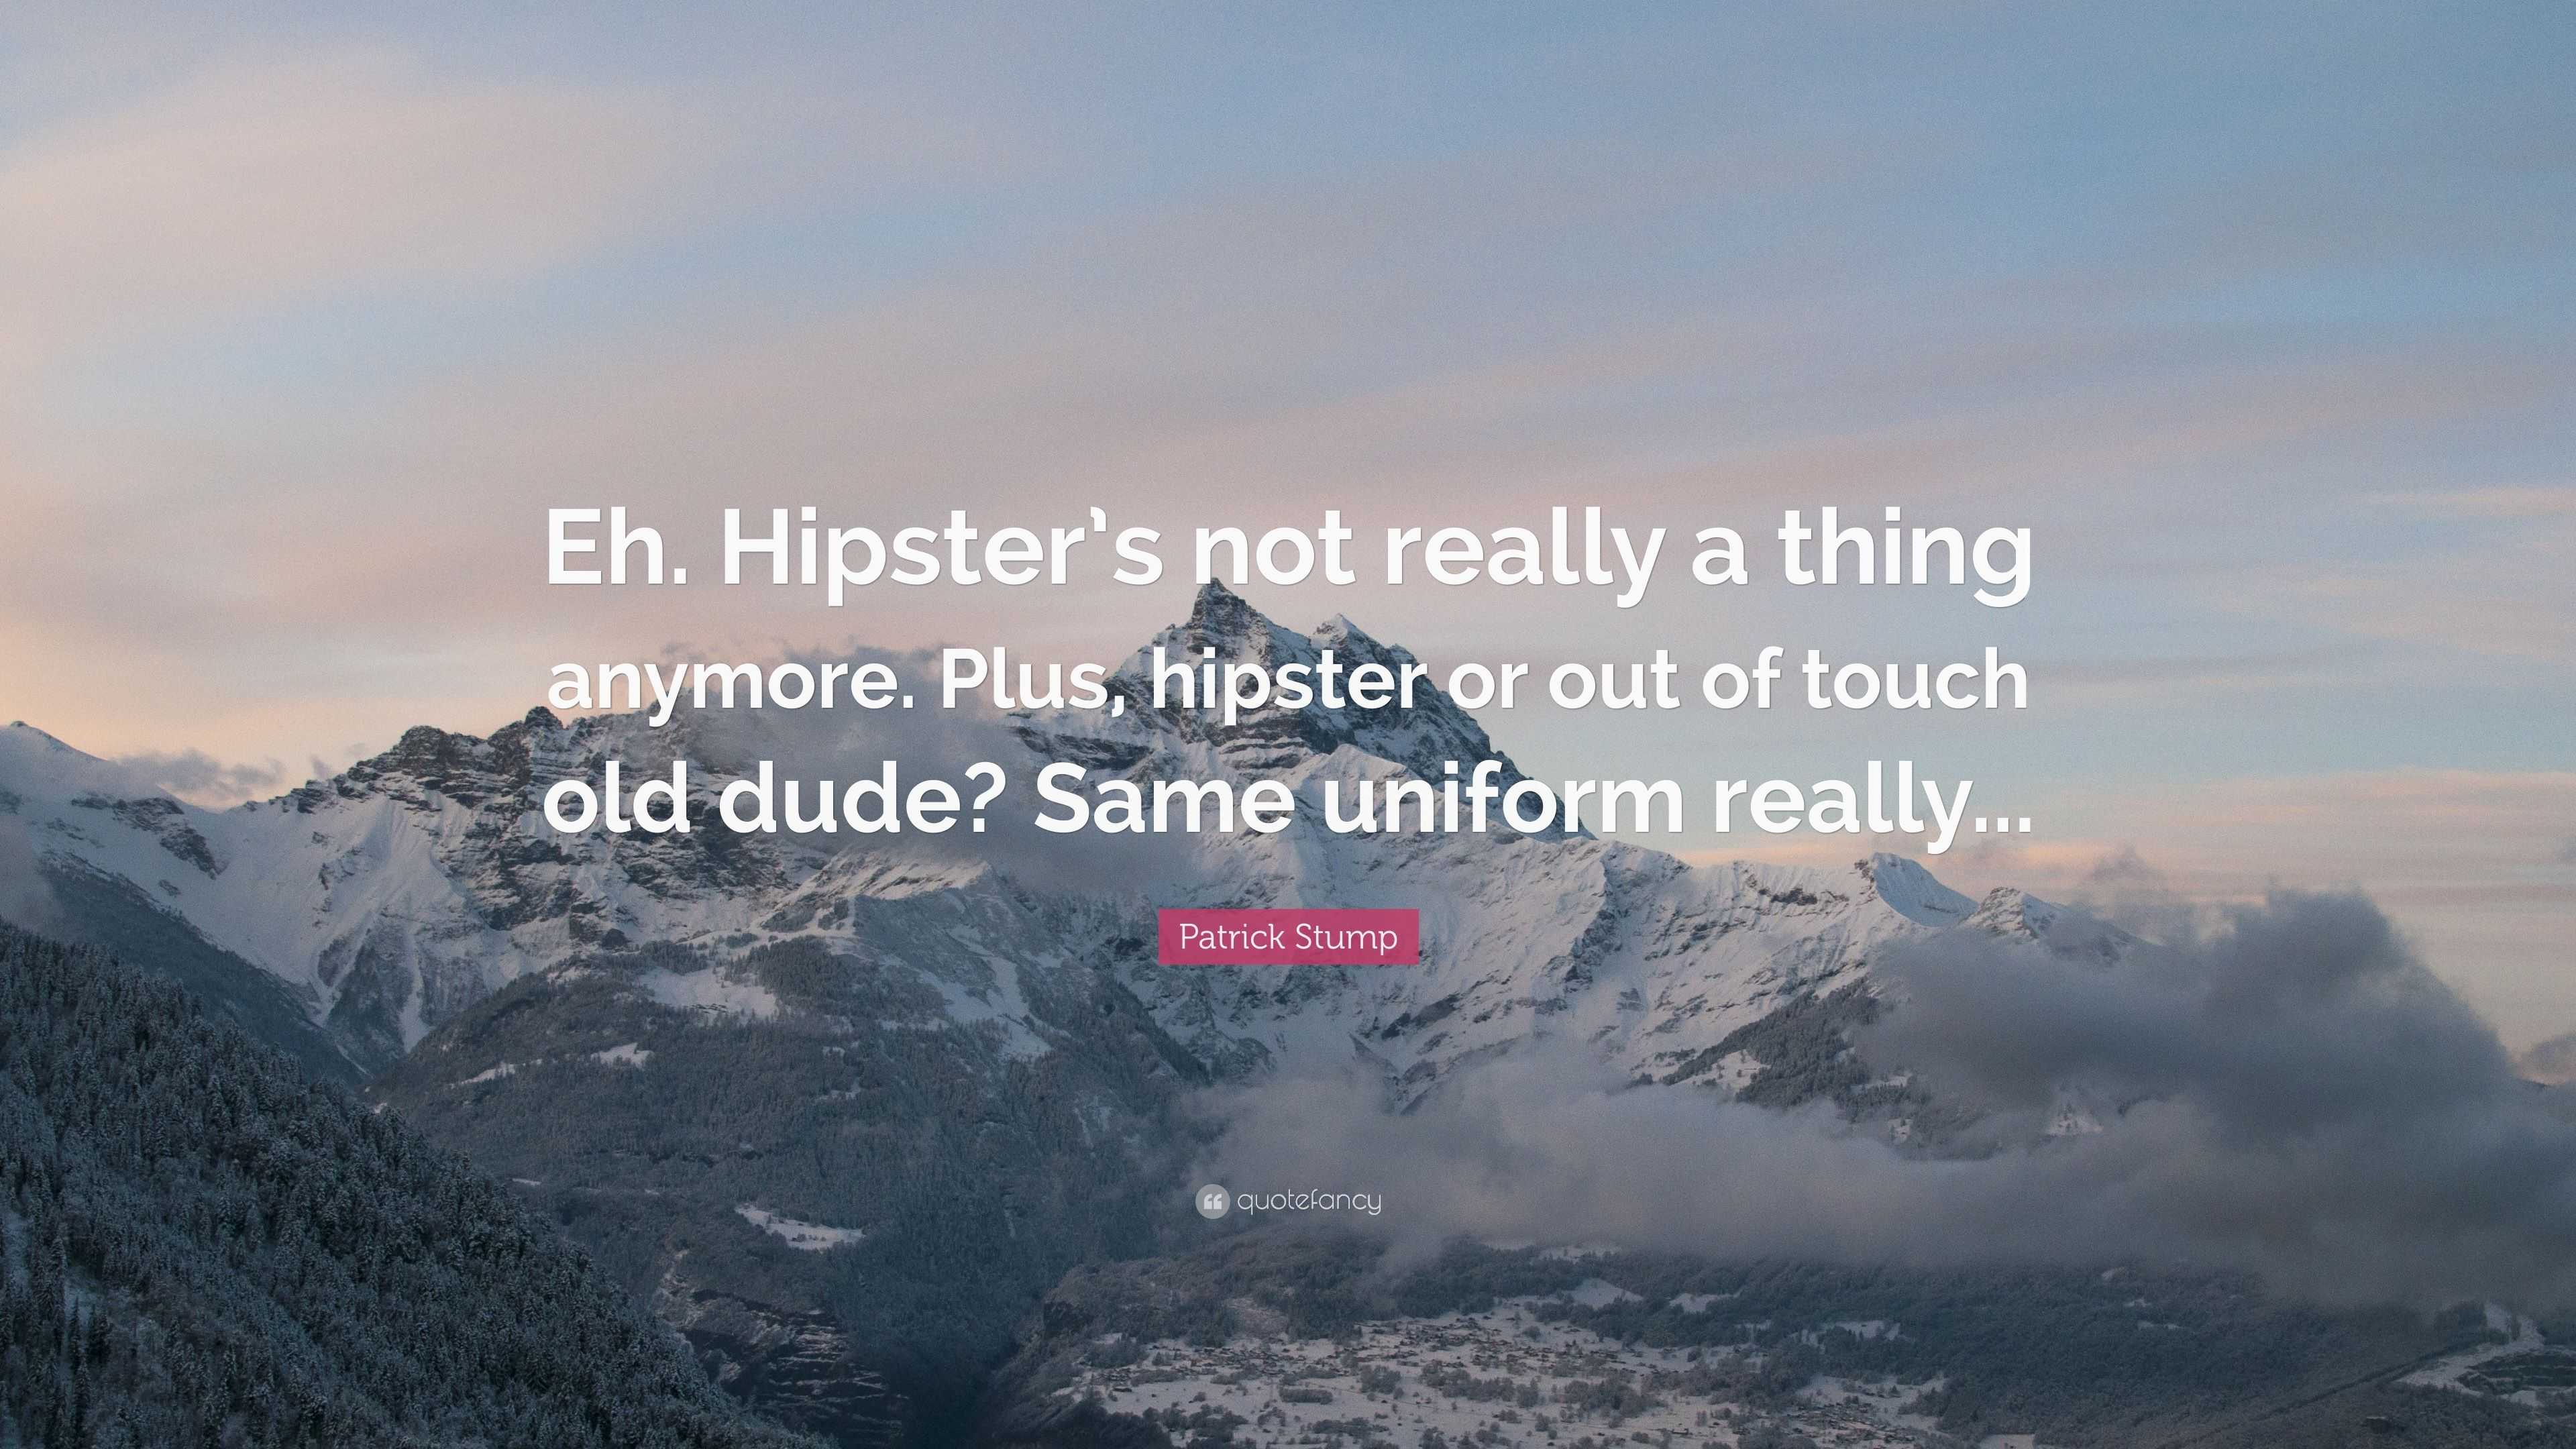 Patrick Stump Quote: “Eh. Hipster's not really a thing anymore. Plus,  hipster or out of touch